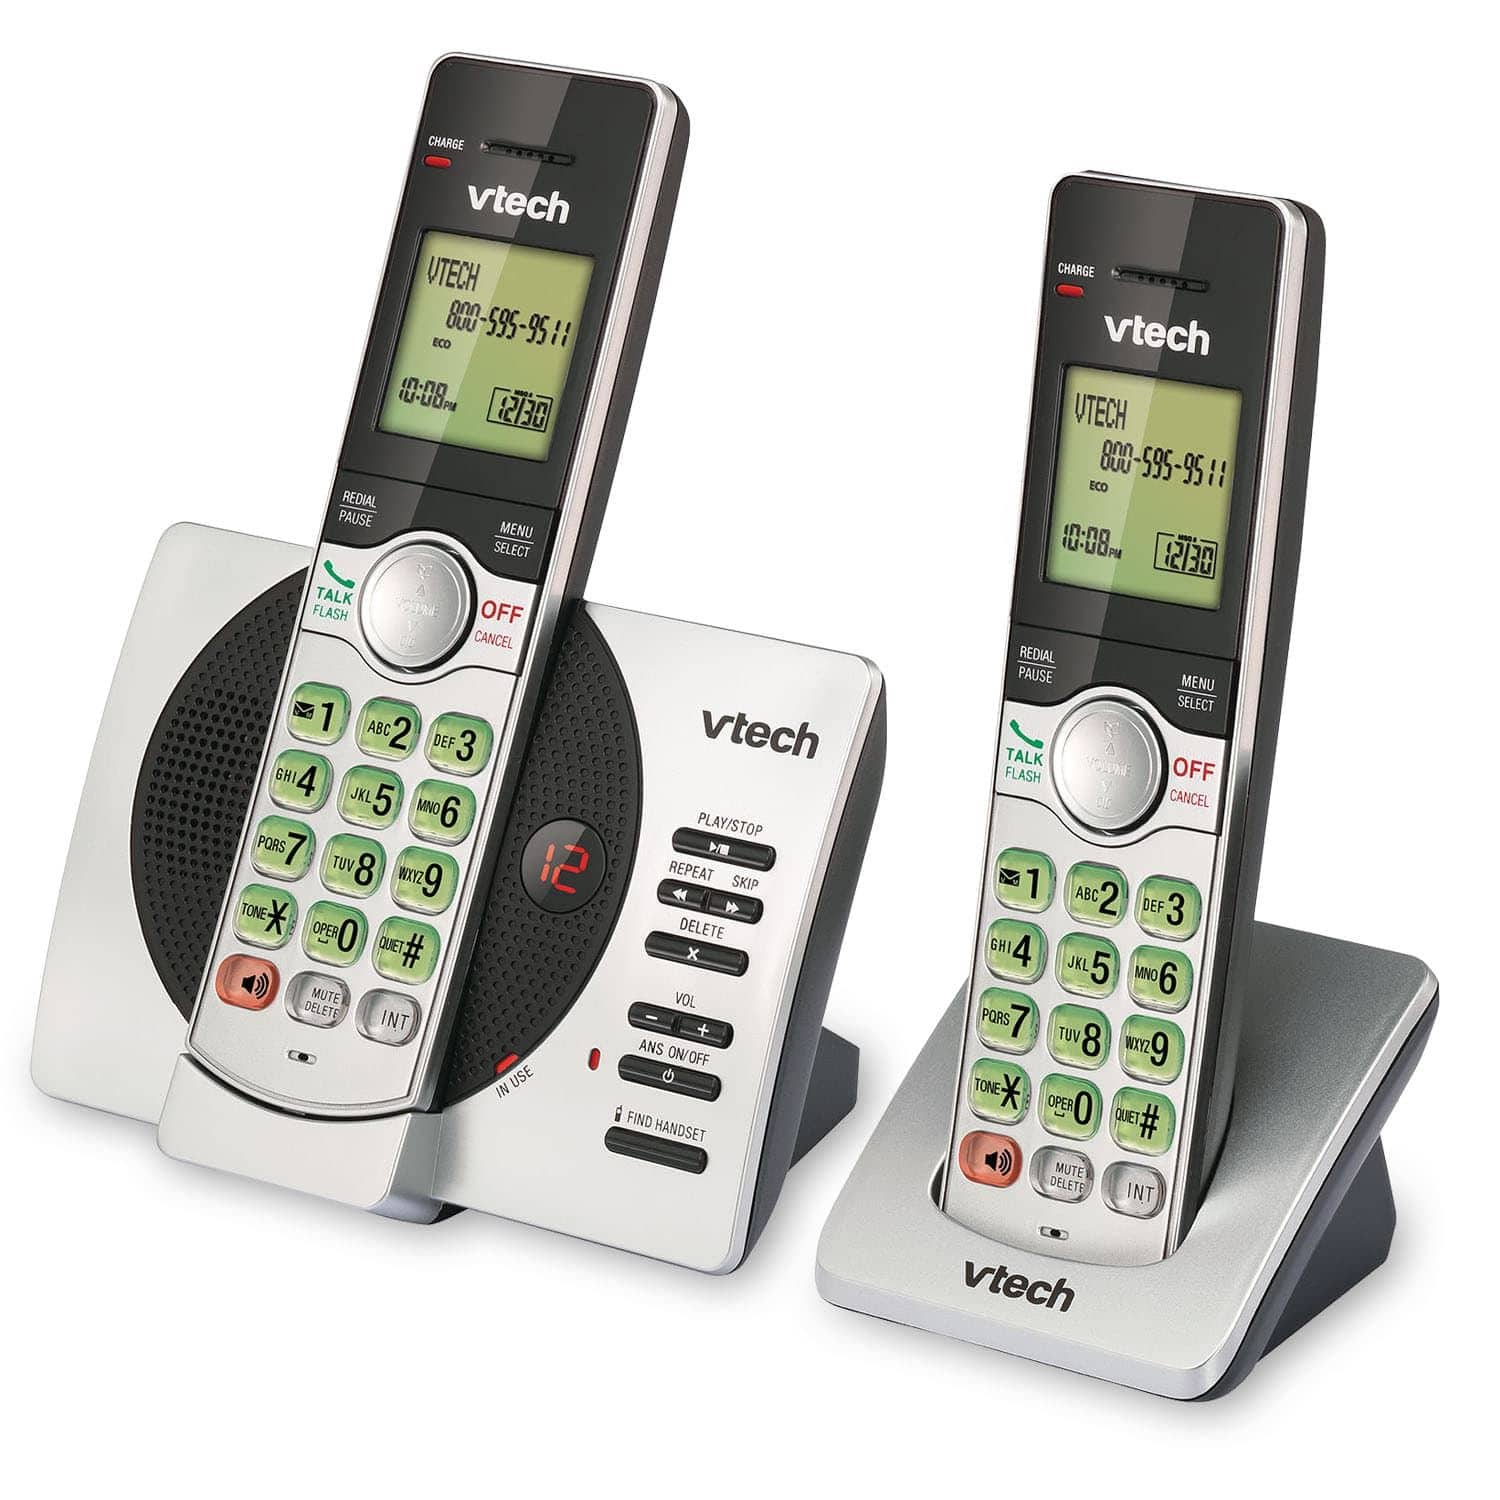 VTech CS6429 DECT 6.0 Handset Cordless Telephone Answering System, Silver